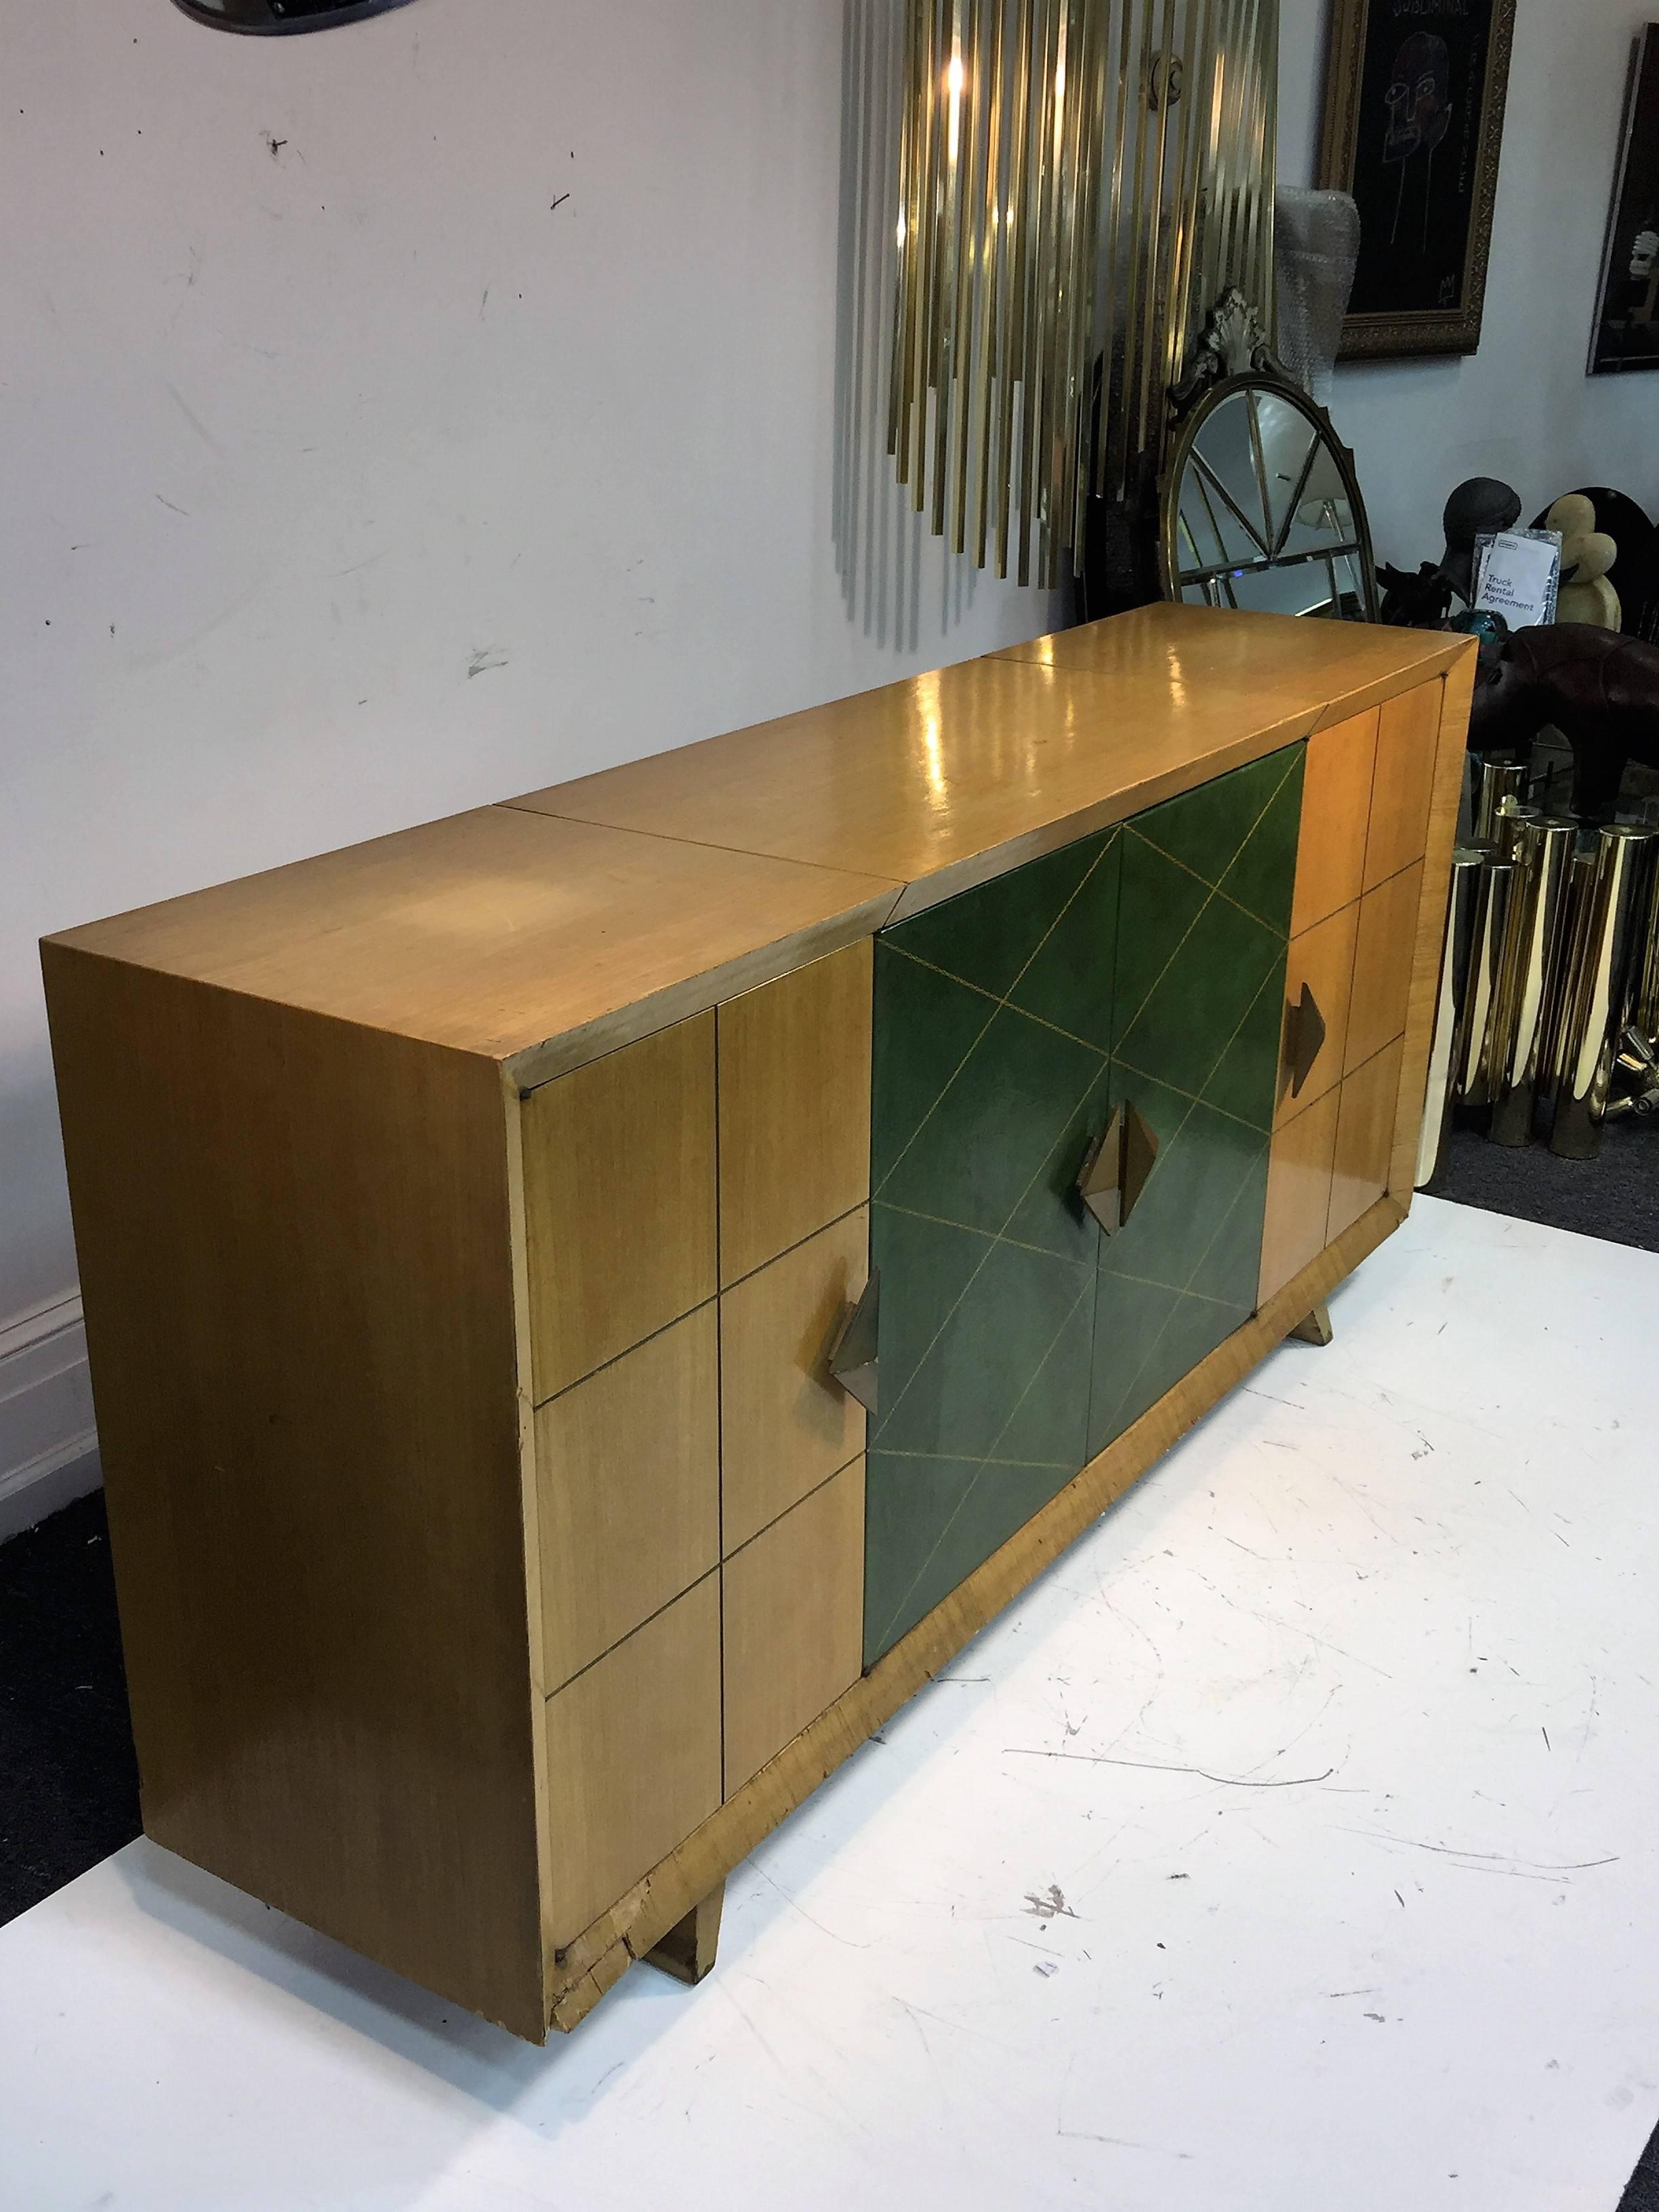 Great design bleached mahogany veneer bar cabinet designed by Tommi Parzinger with center doors covered in emerald green leather with gold embossed diamond pattern. Moderne gold triangular faceted wood handles that compliment the diamond design in